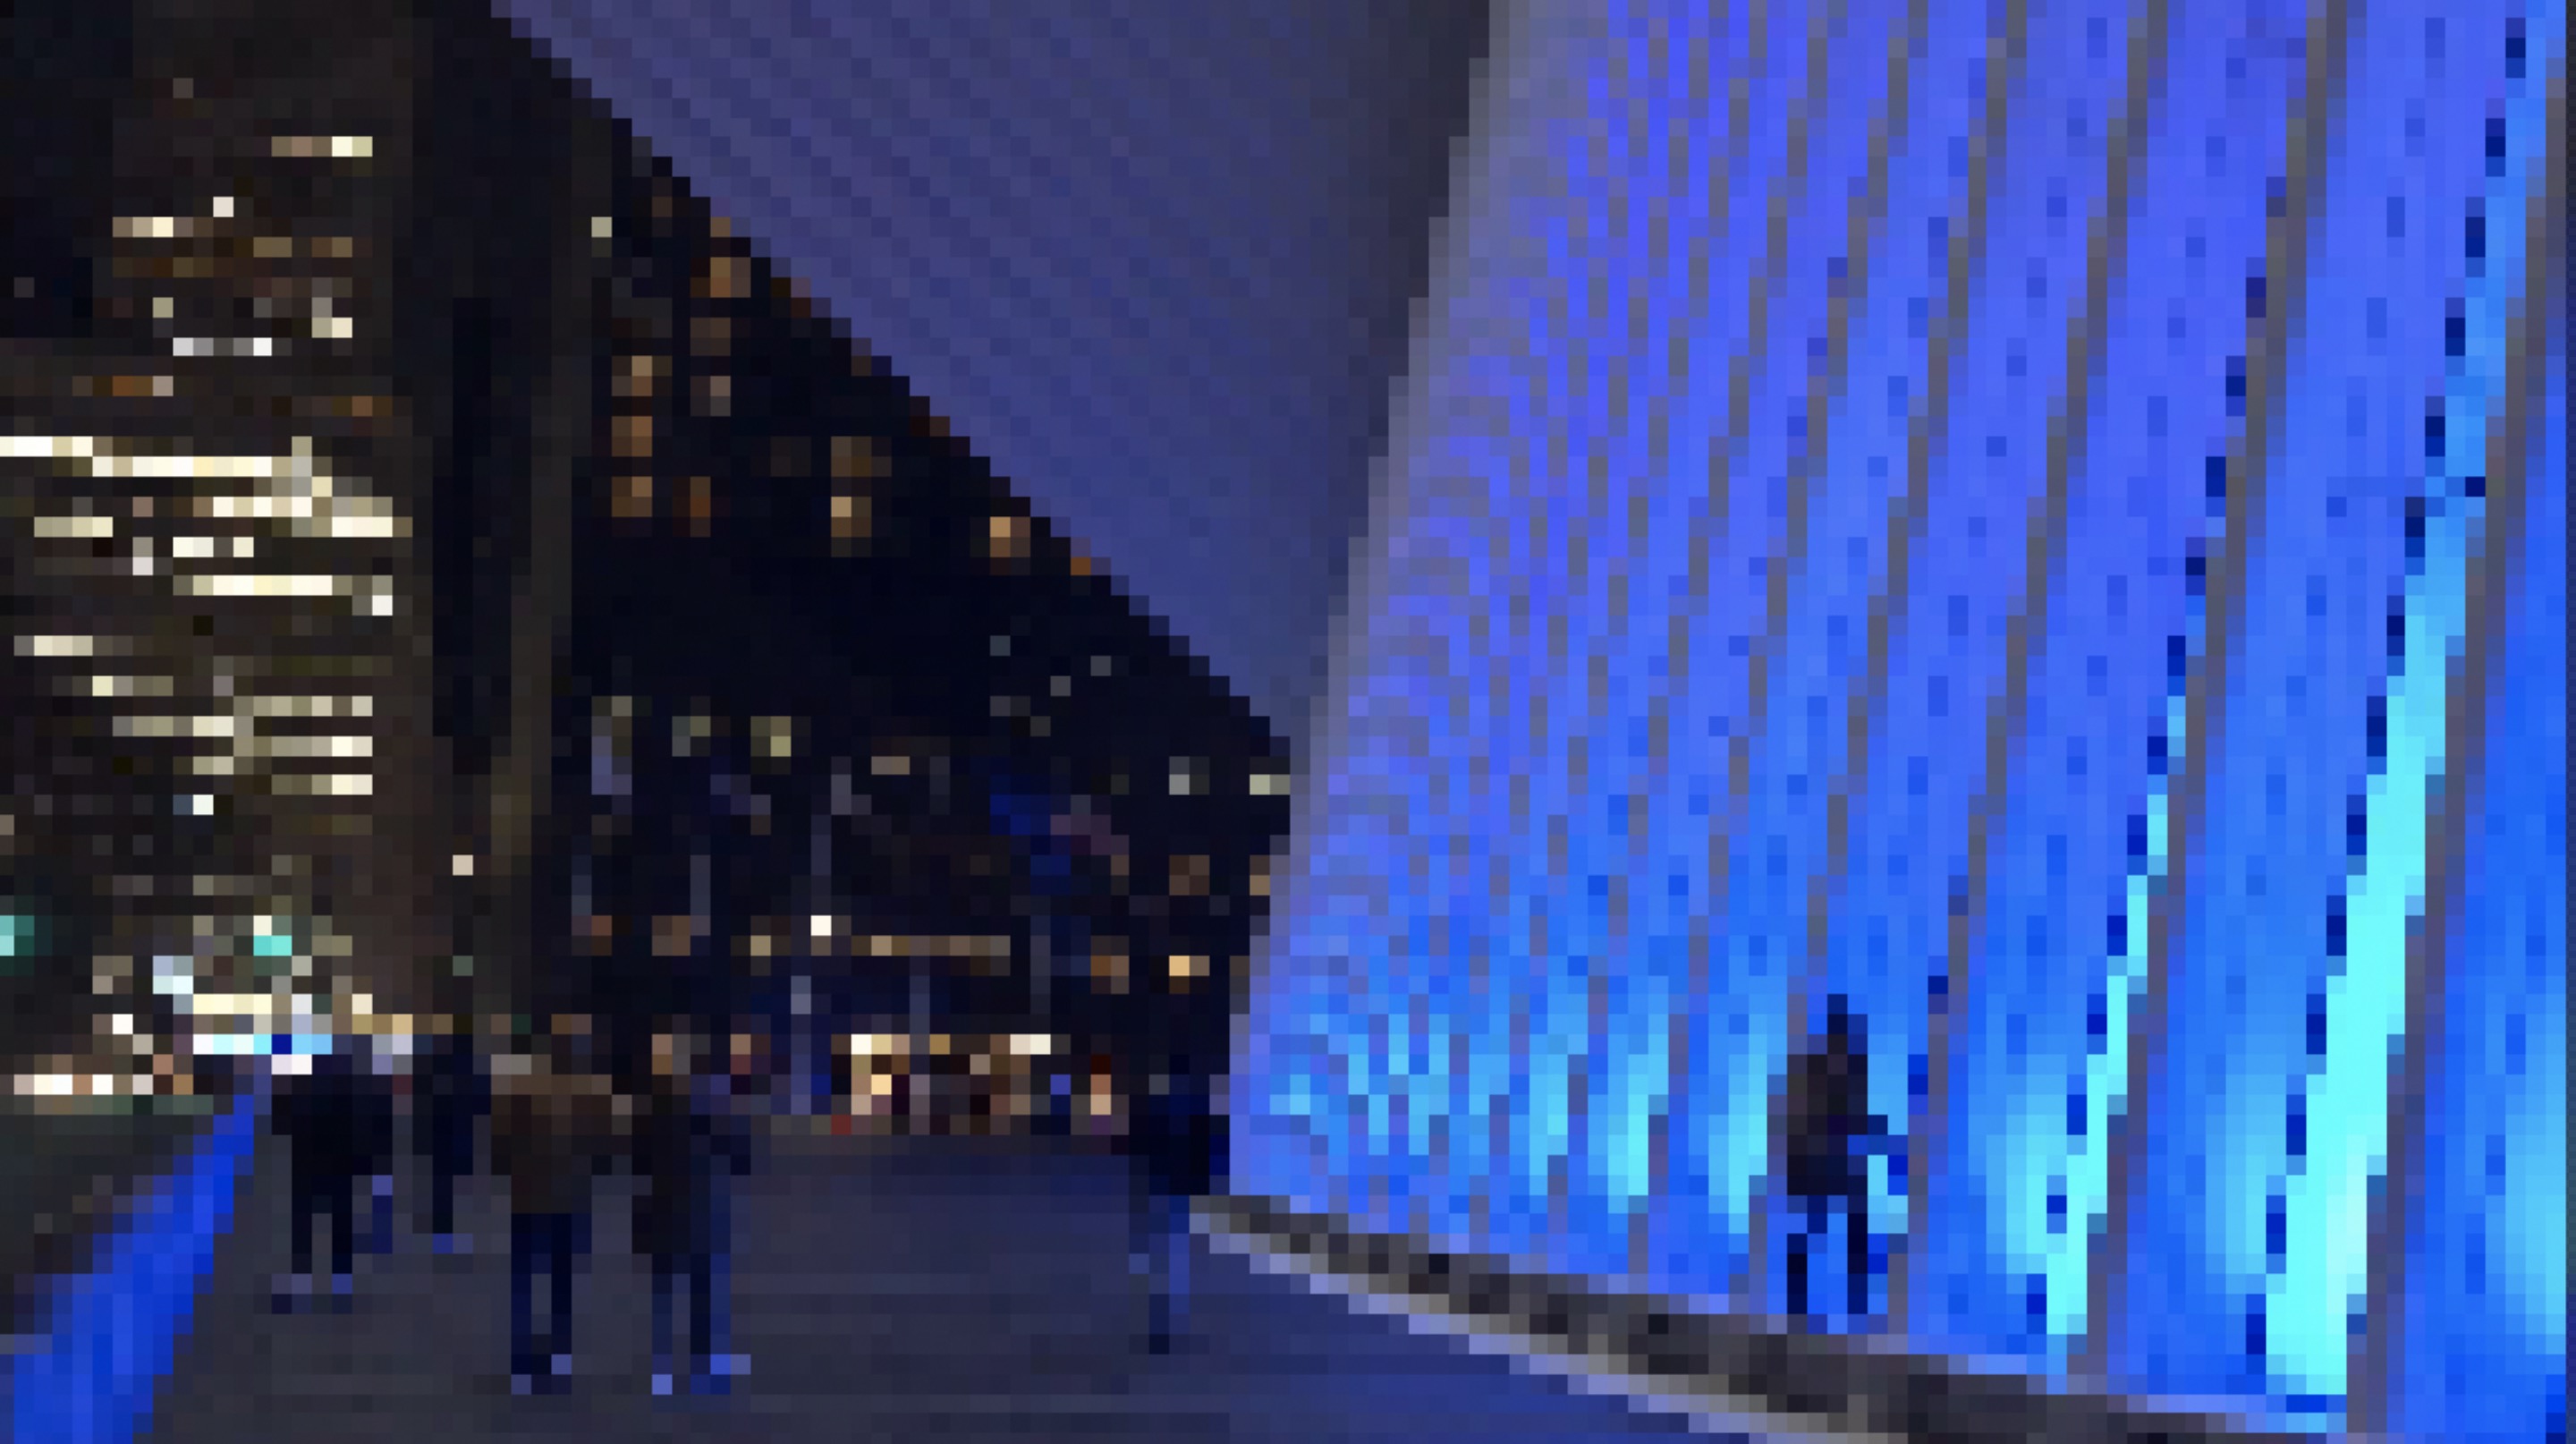 A pixelated photo at night outside the World Trade Center station, with turquoise lights lighting up the station building to the right and people standing on a walkway on the left